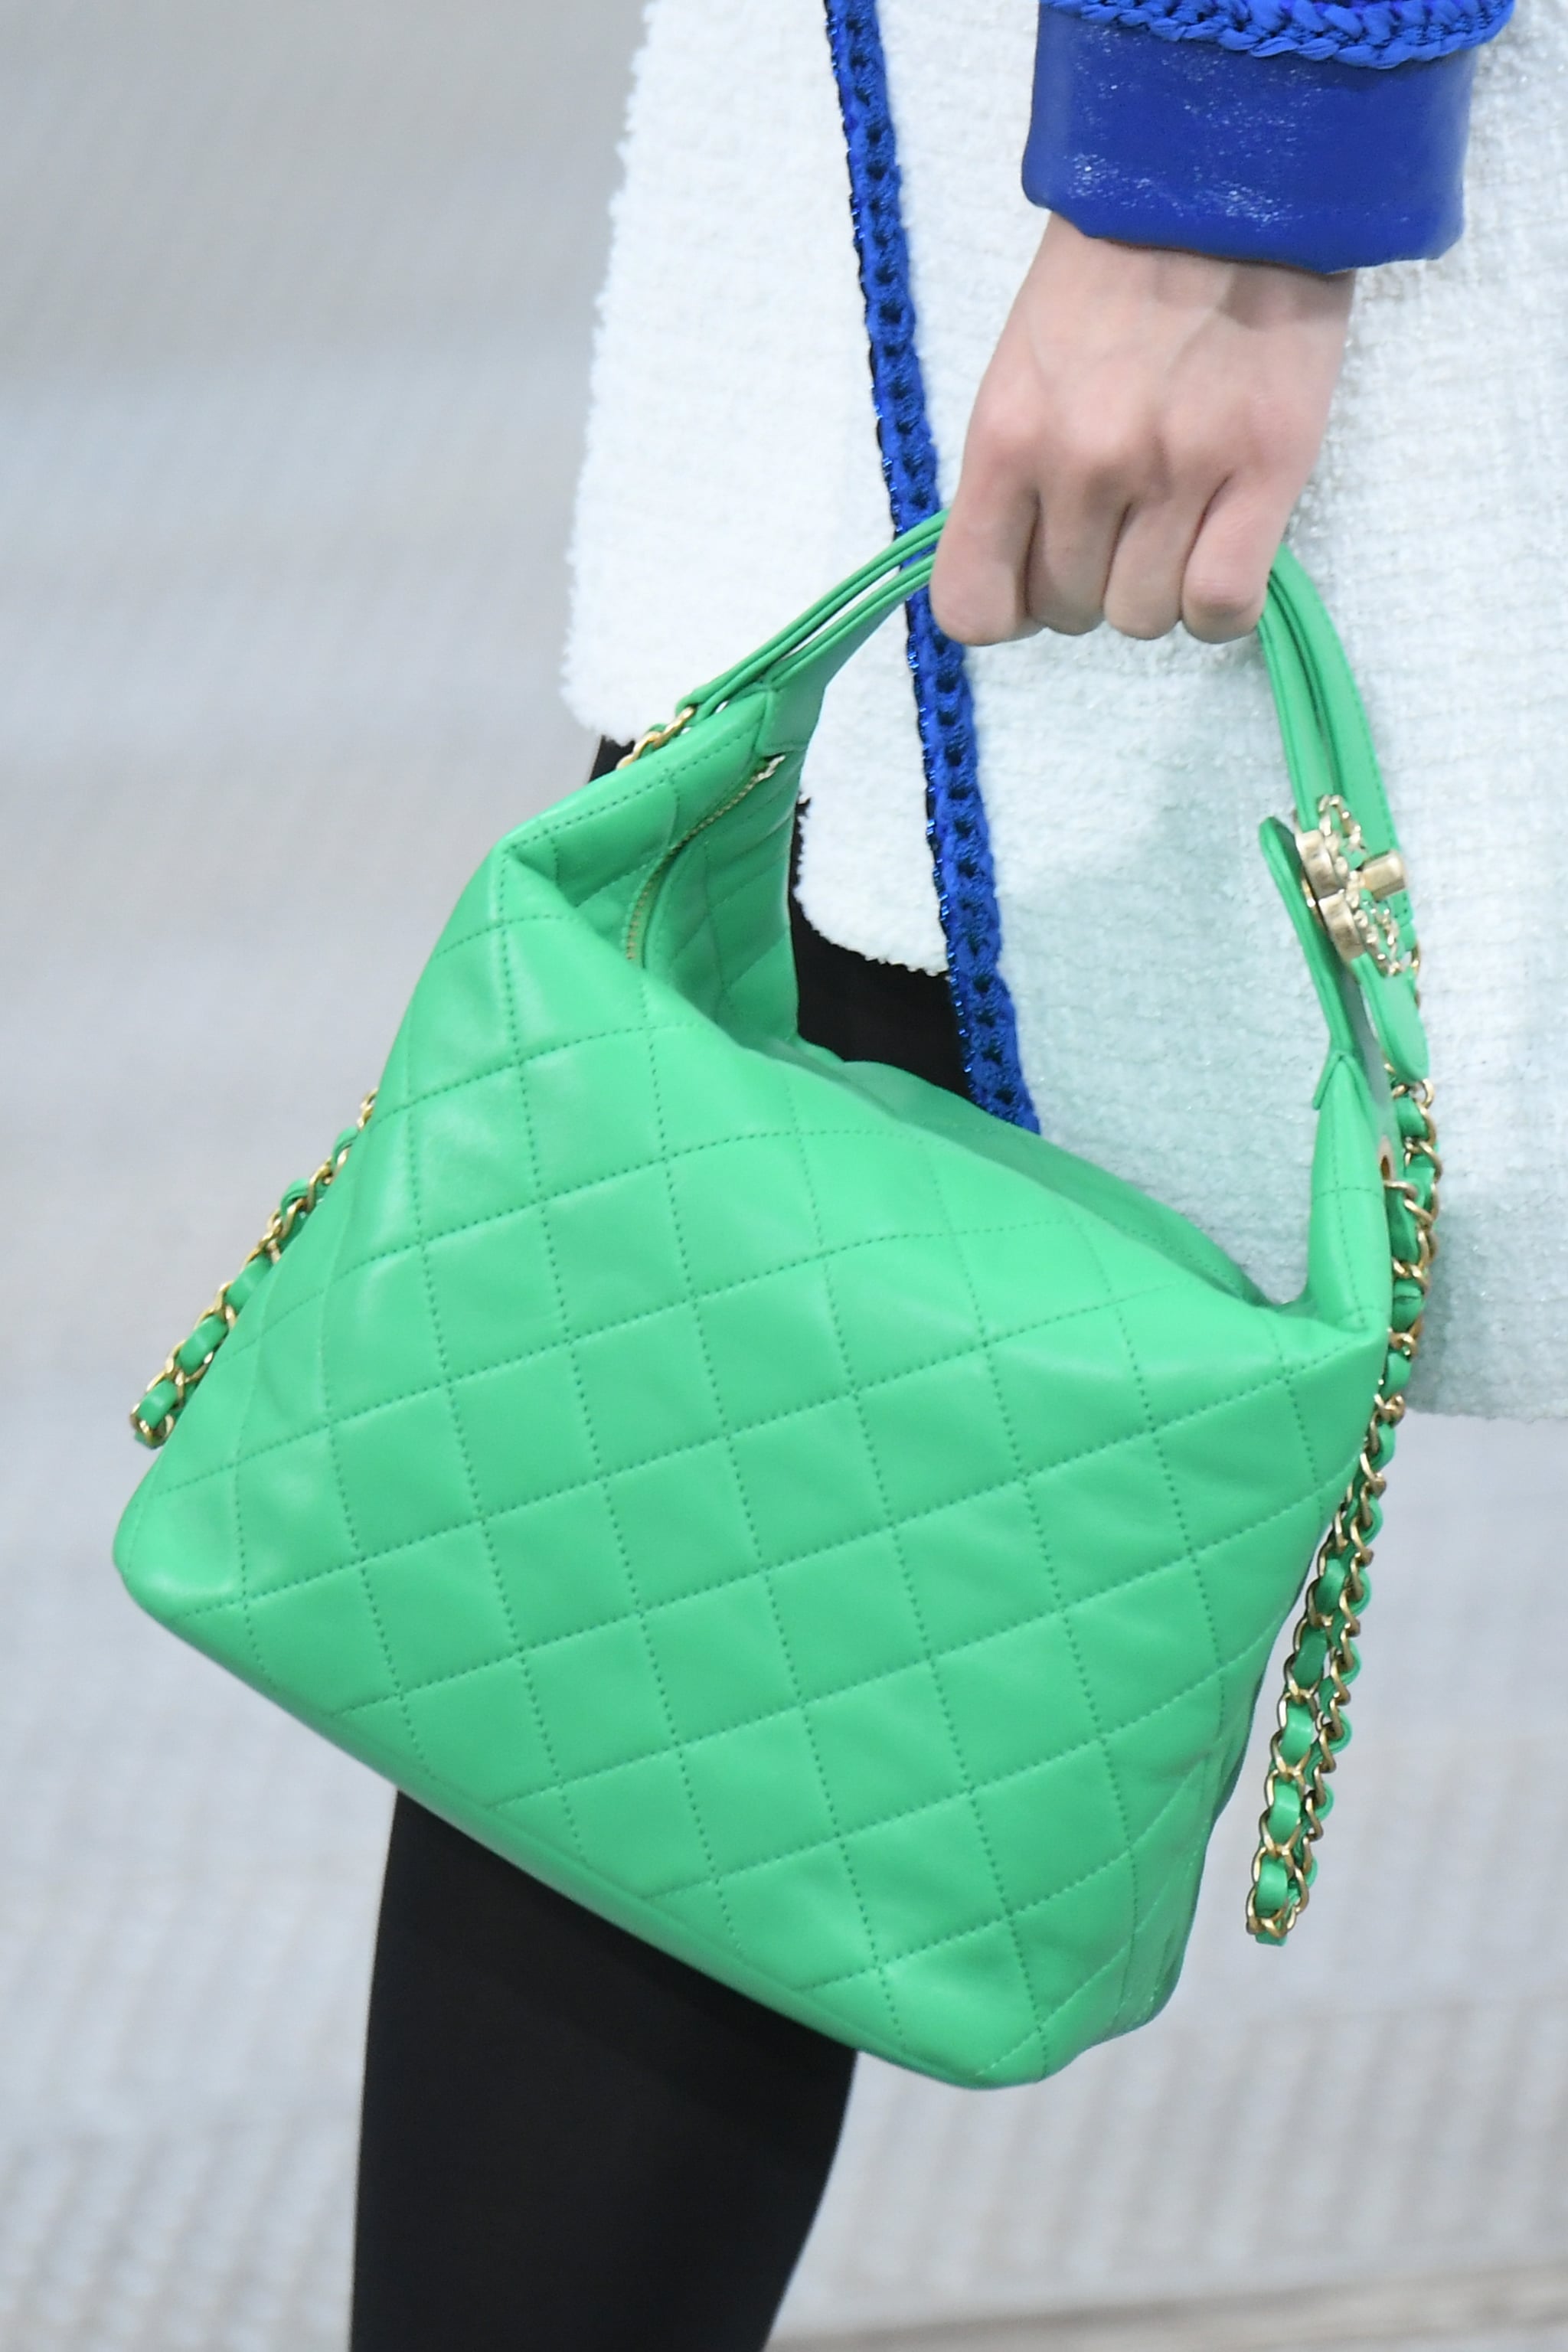 A Chanel Bag on the Runway During Paris Fashion Week, Chanel Just Gave Us  the Walkable Flats of Our Dreams (and a Neon Green Bag We Never Knew We  Needed)